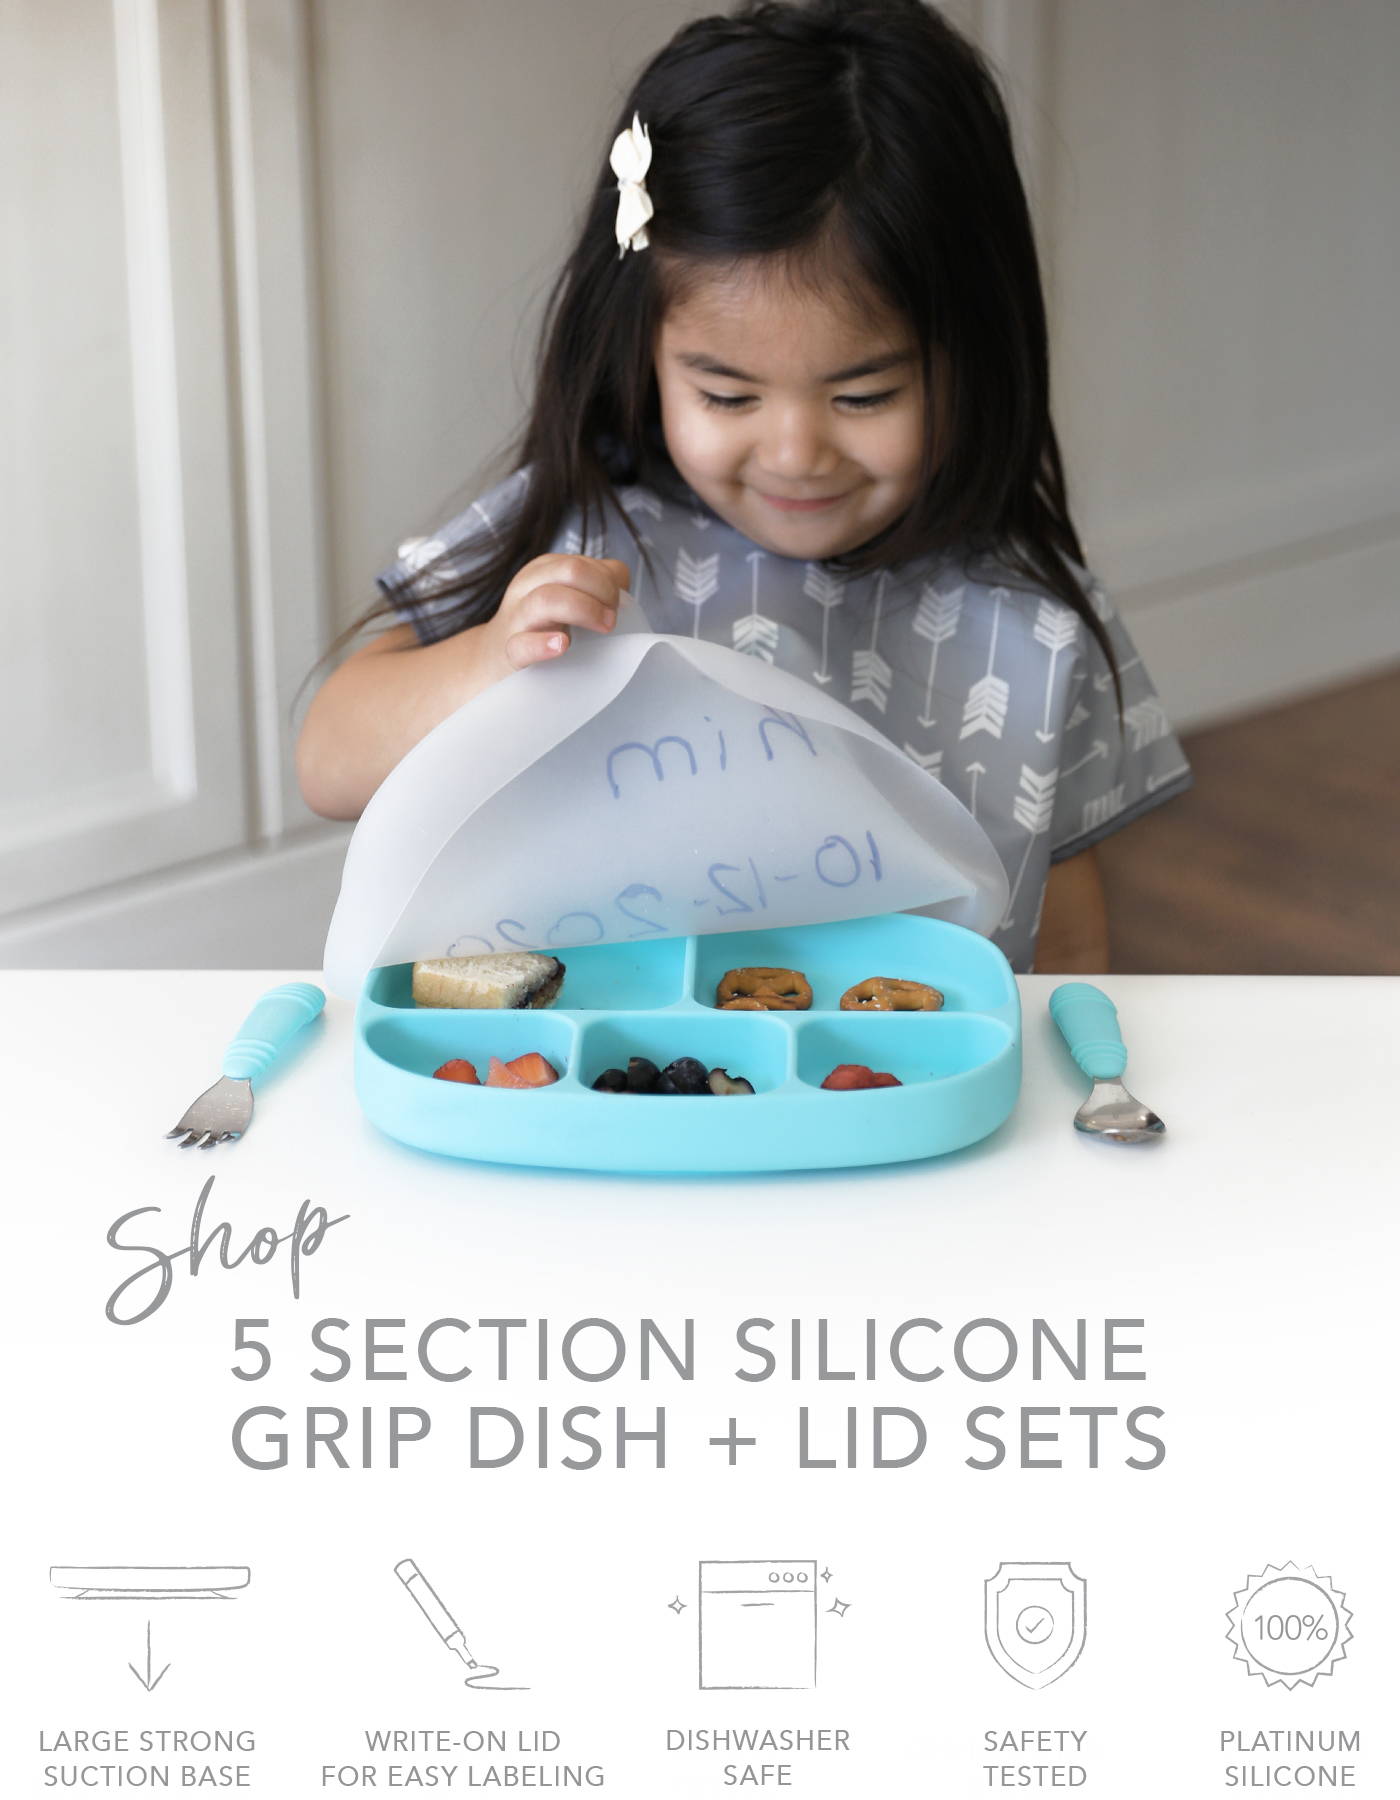 shop 5 section silicone grip dish and lid sets, strong suction base, great for baby-led weaning, encourages learning, safety tested, platinum silicone